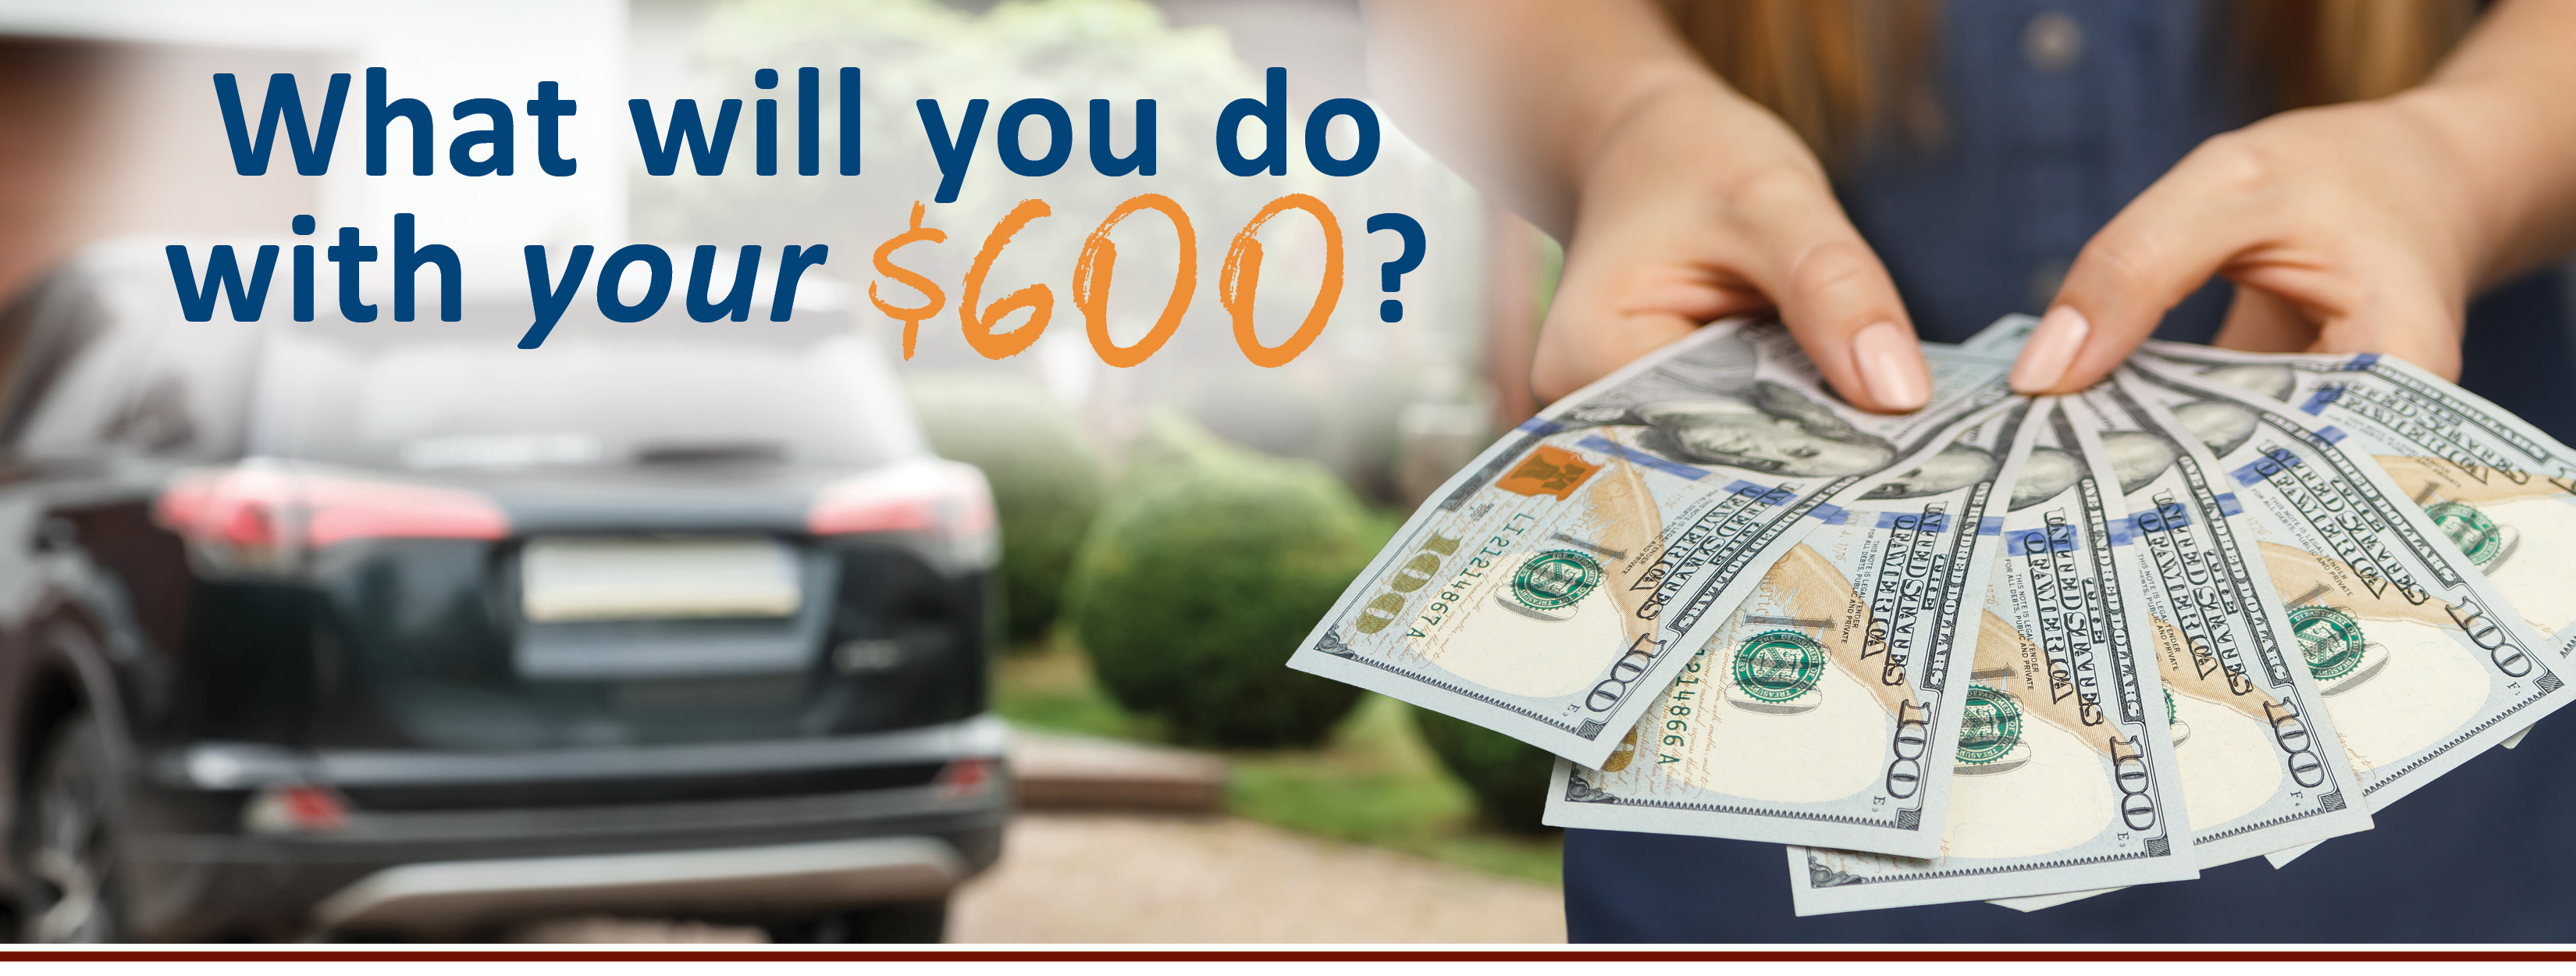 What will you do with your $600?